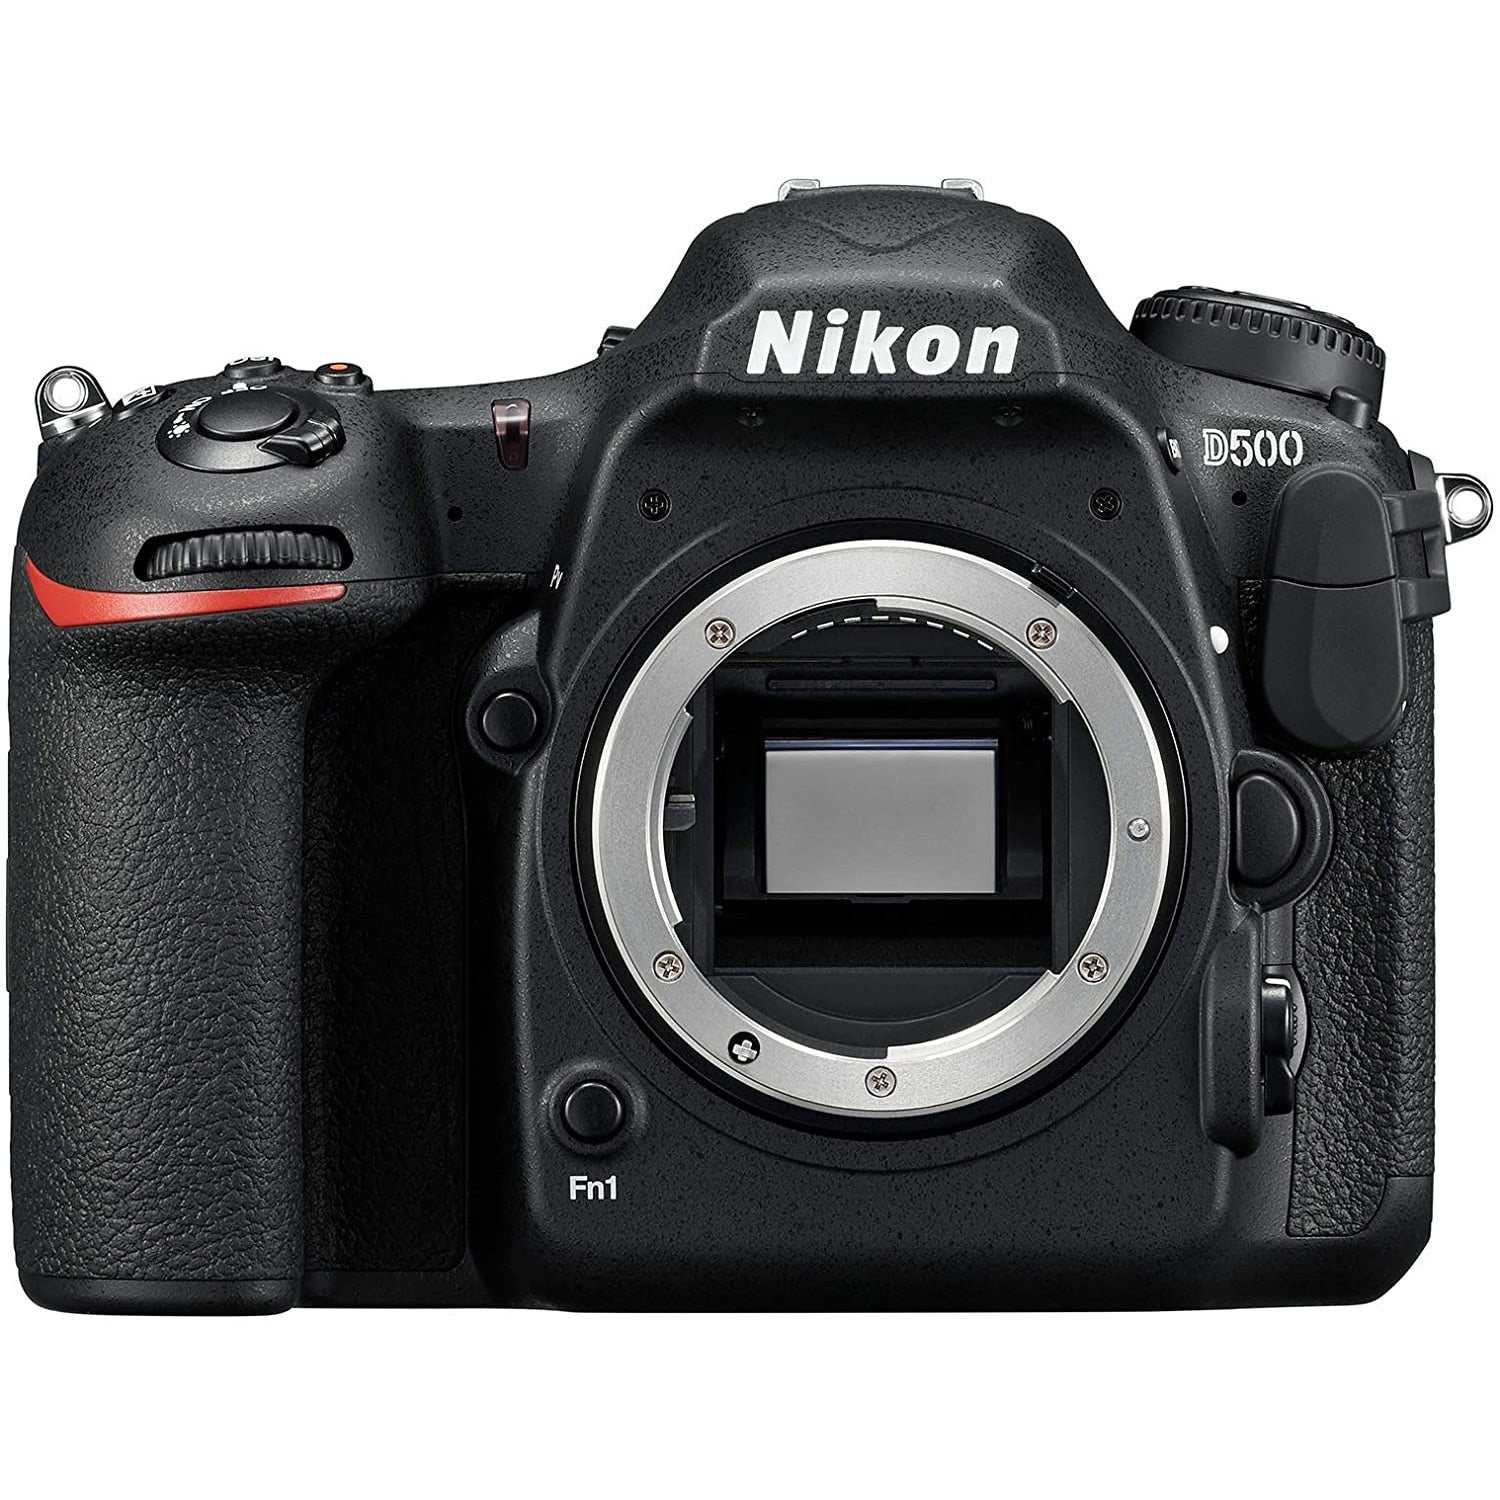 Nikon D500 Digital SLR Camera, 4K Ultra HD, 20.9MP With 3.2" Tiltable Touch Screen, Black, Body Only